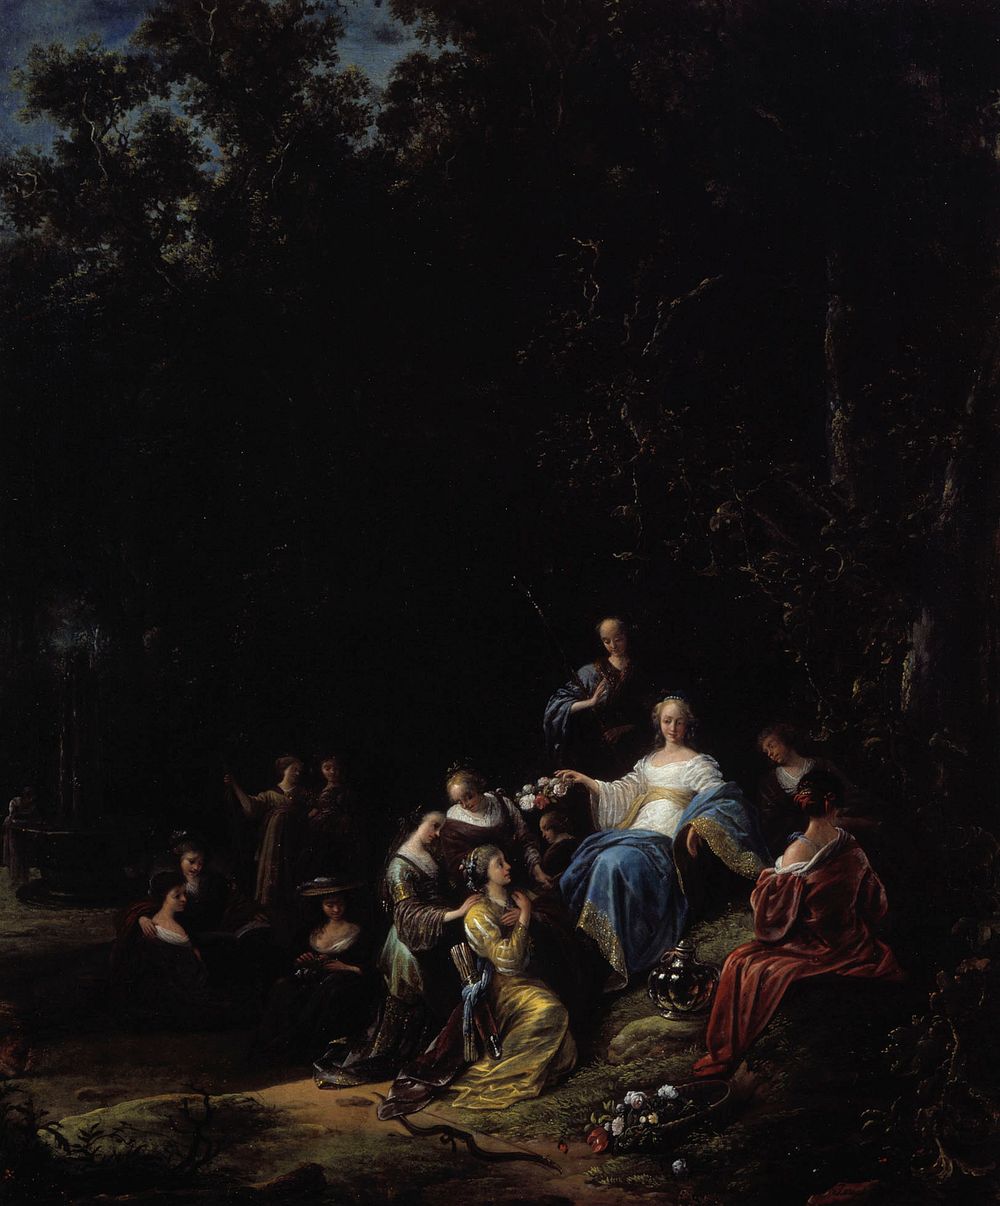 Amarillis crowning mirtillo (a scene from the pastoral play il pastor fido), 1610 - 1675